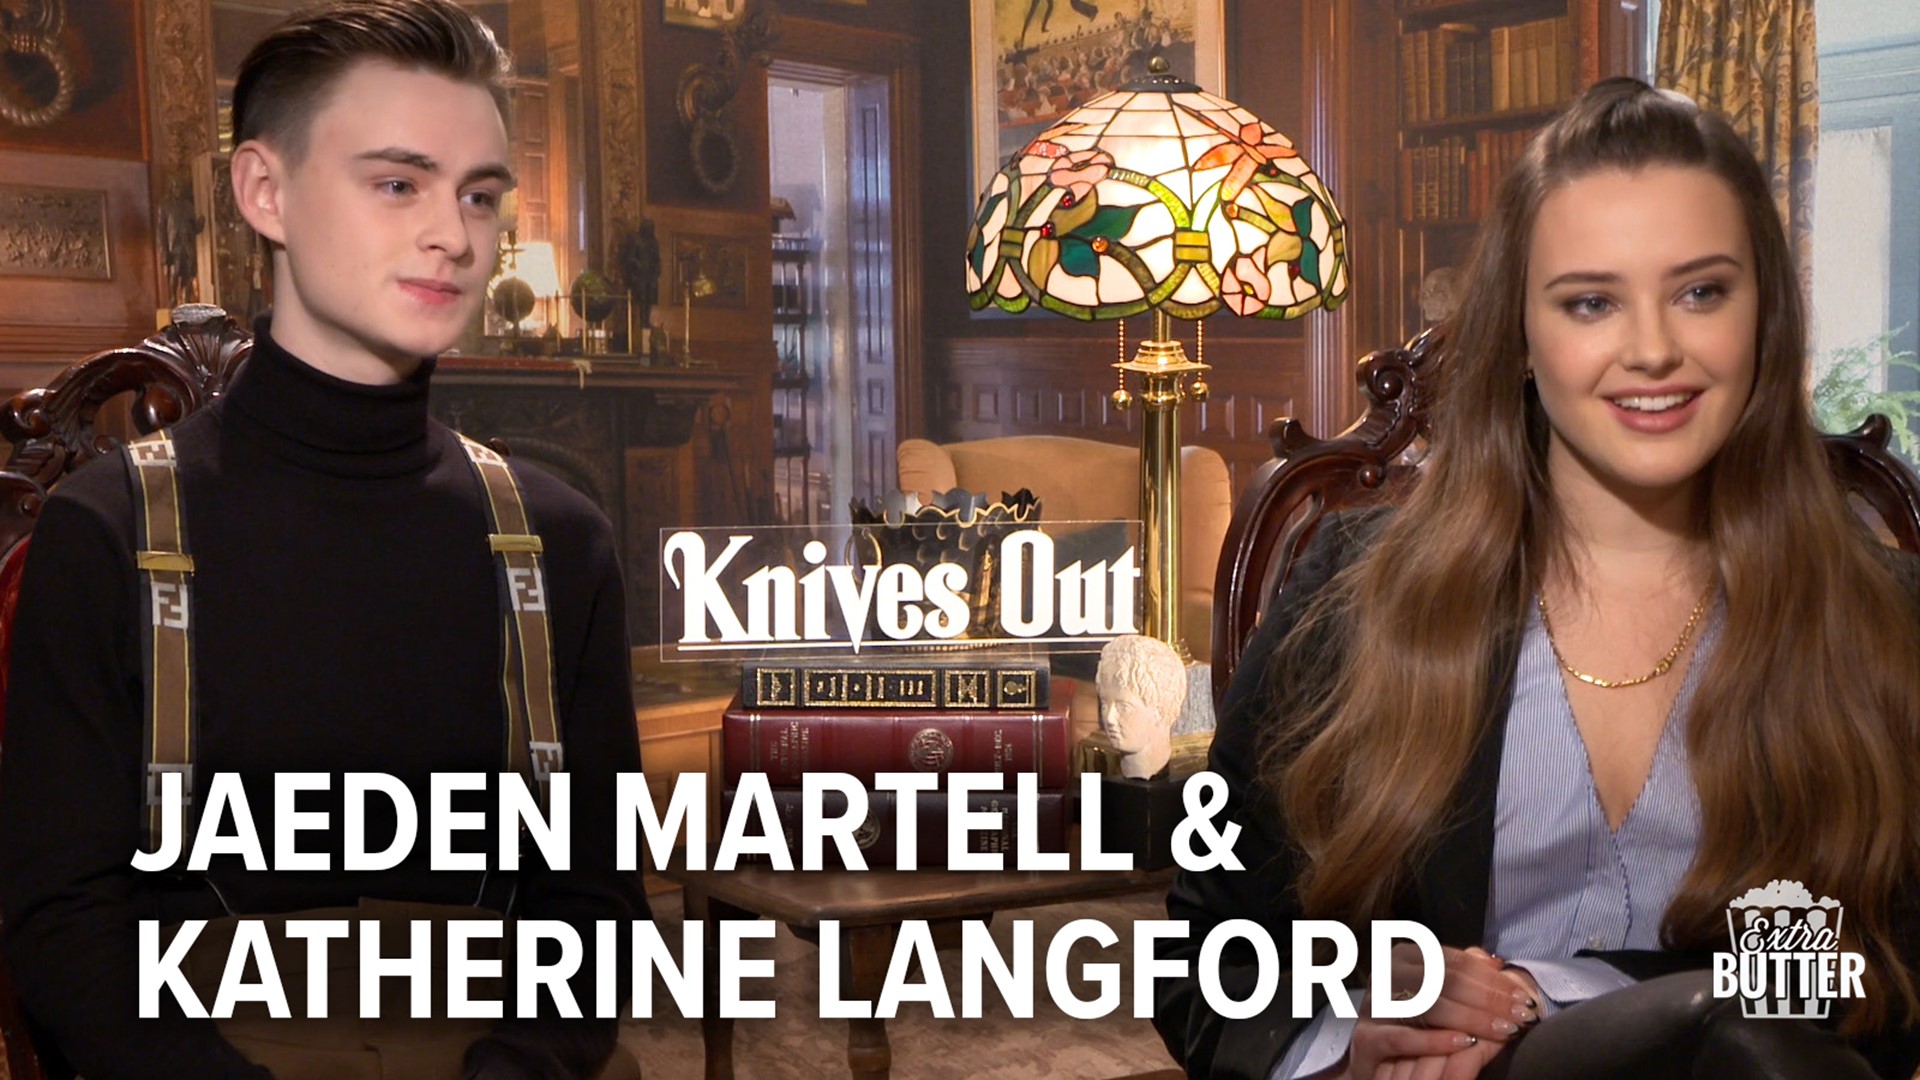 Katherine Langford and Jaeden Martell talk about their roles in 'Knives Out.' The two also tell Mark S. Allen what it was like working with the other actors.